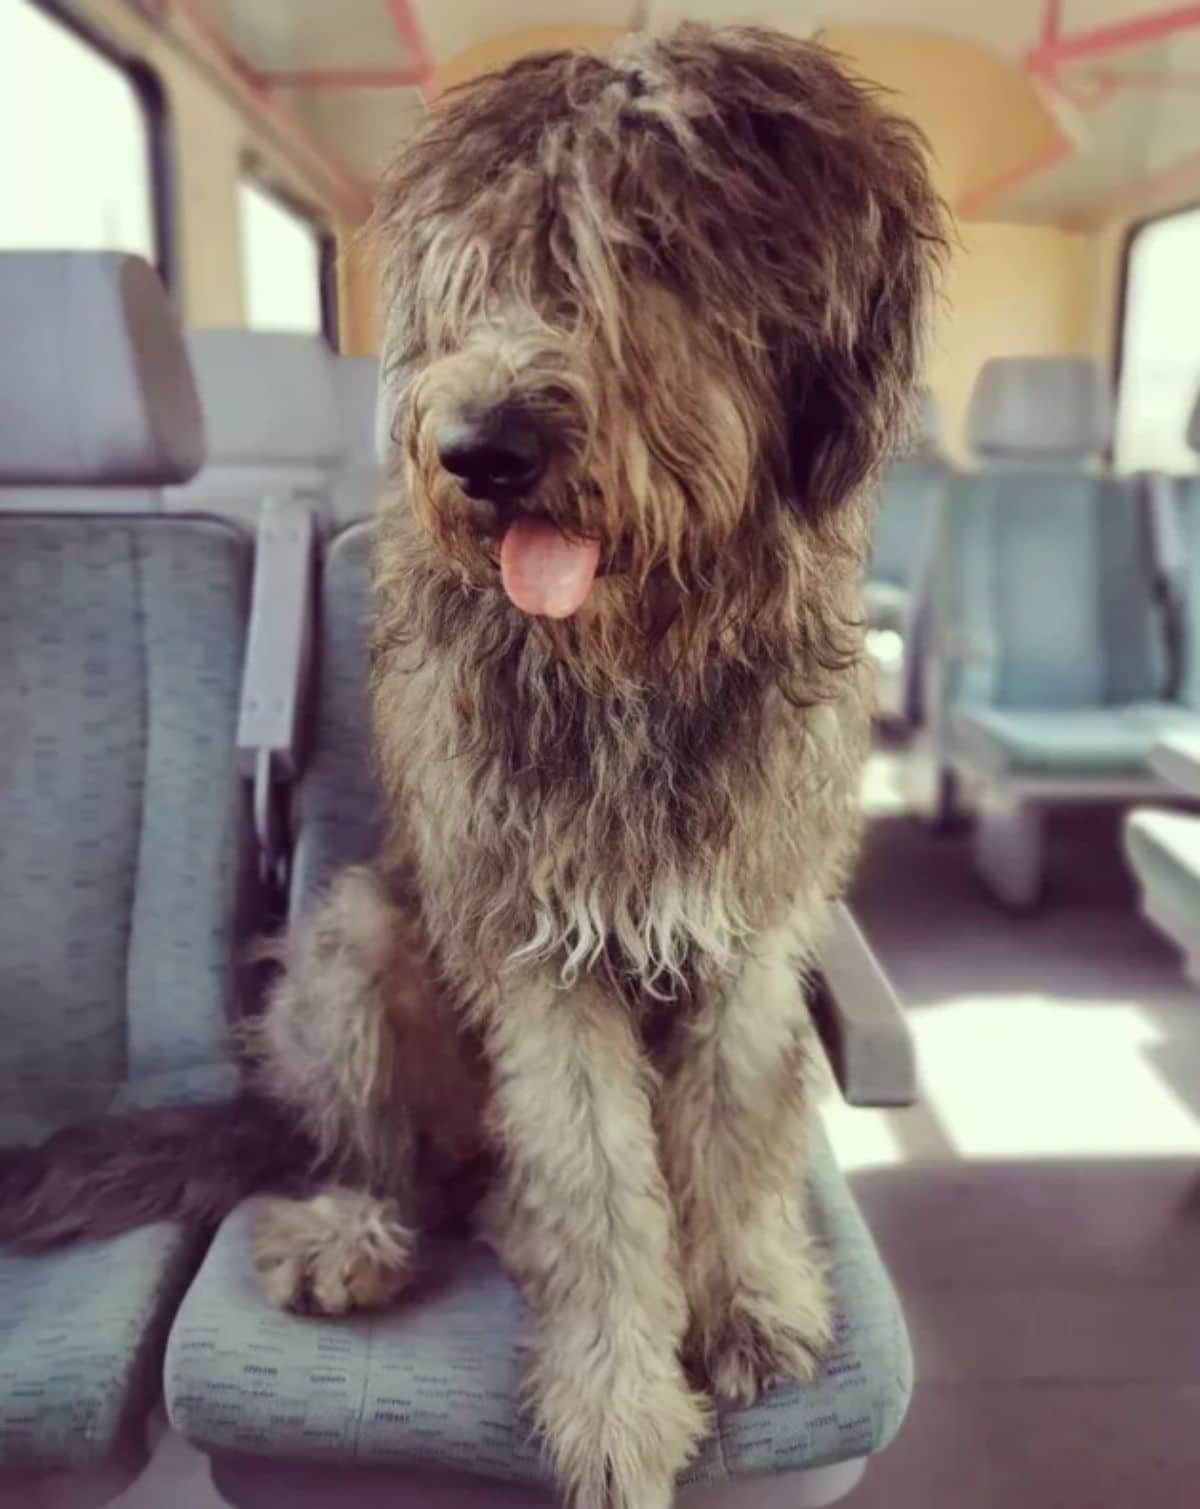 fluffy brown black and white dog sitting on a grey train seat